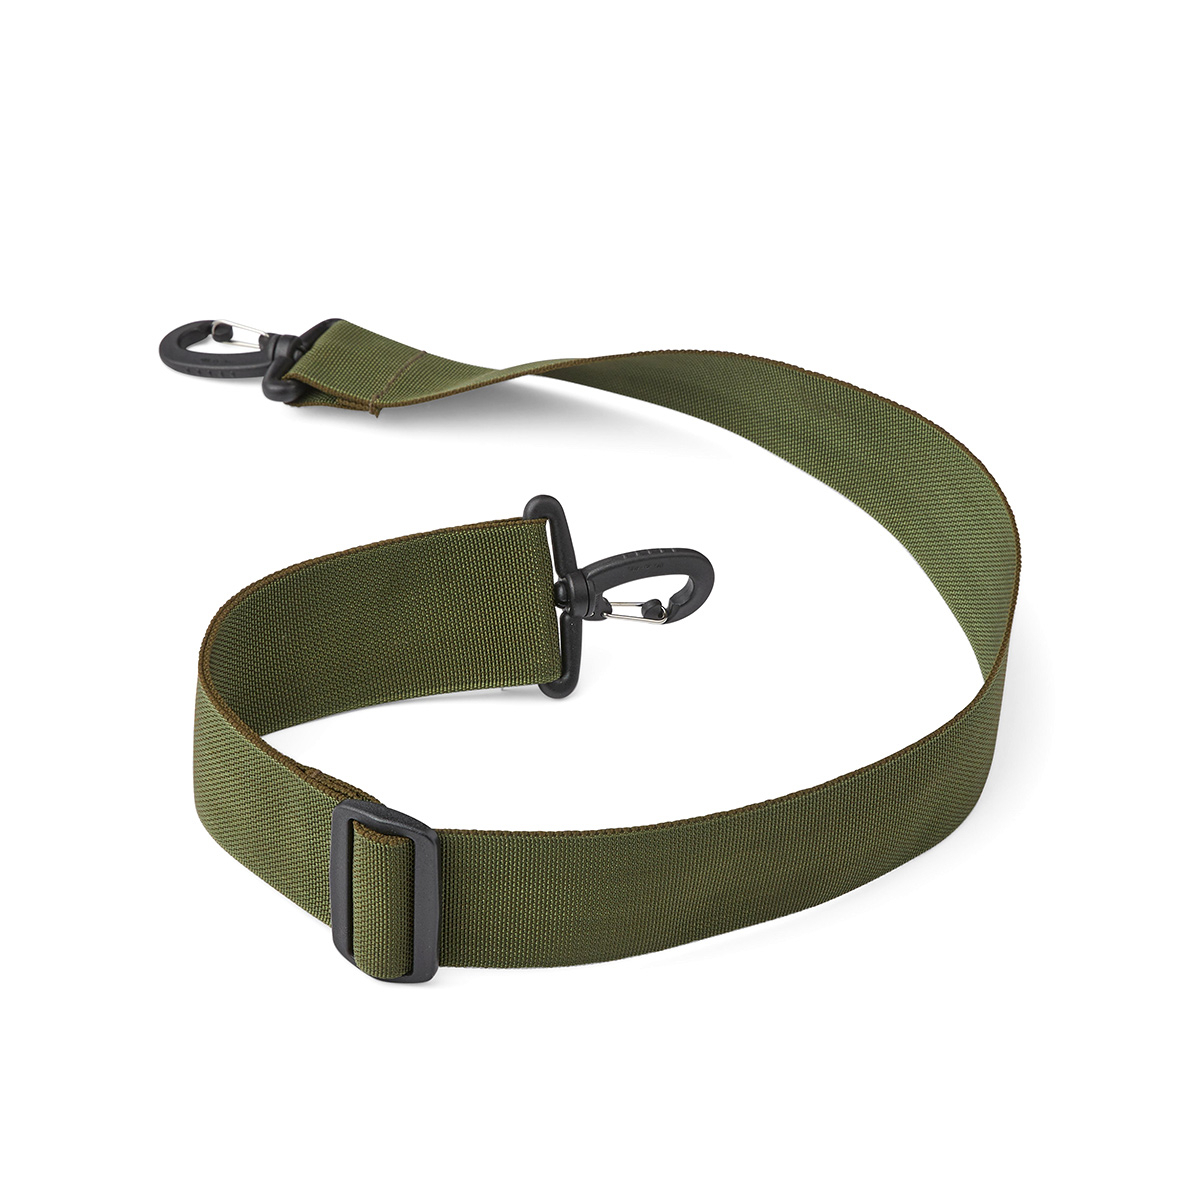 Filson Duffle Webbing Shoulder Strap Olive Drab, replacement for a Duffle  Bag